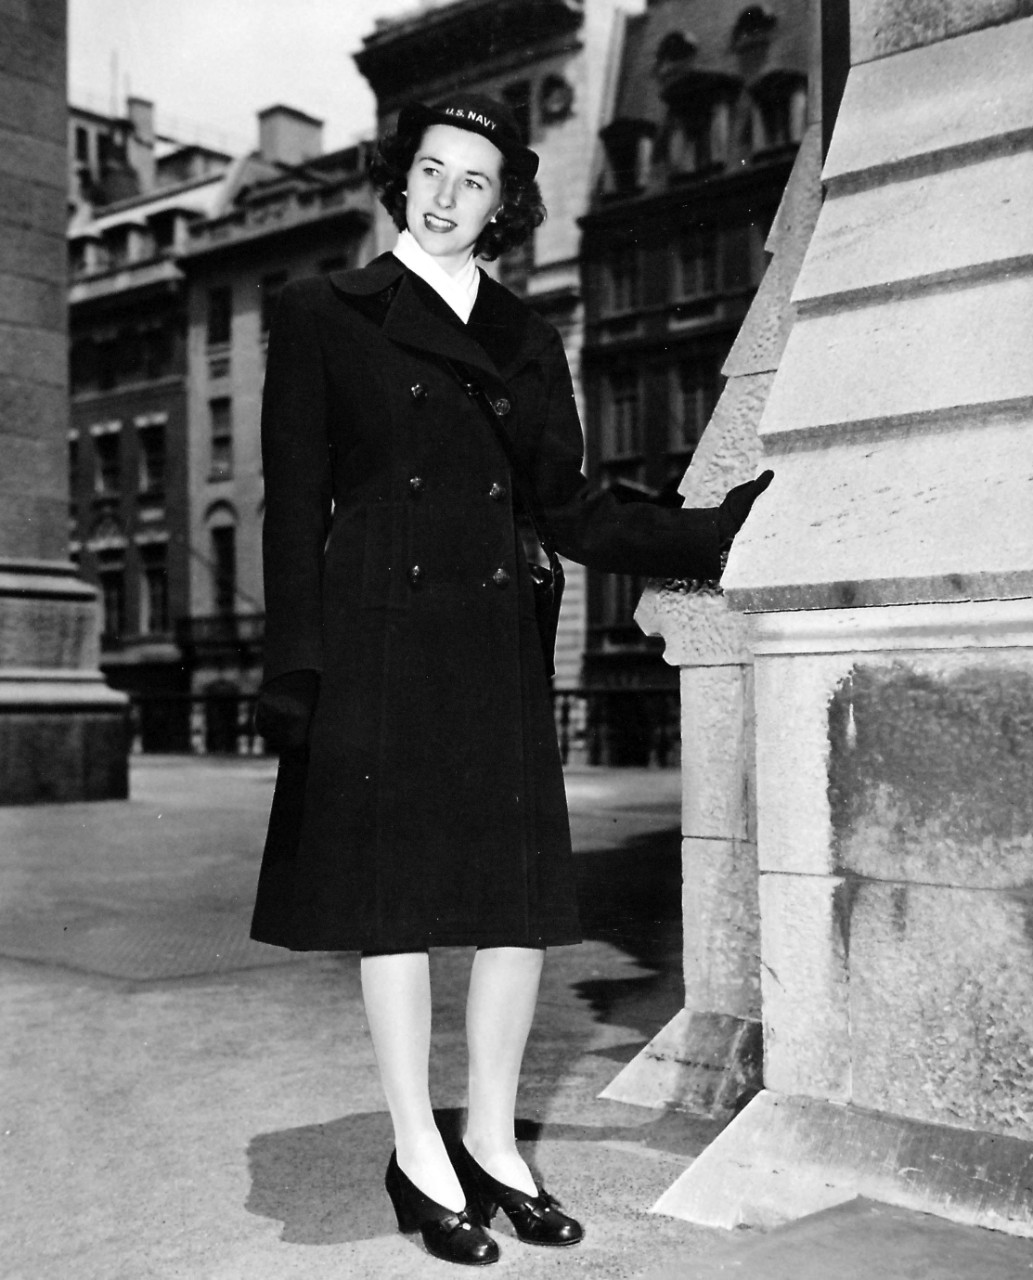 80-G-46611:  Overcoat (front), June 1944.  Correct uniforms worn by enlisted personnel of the Women’s Reserve, U.S. Naval Reserve, are modeled by Specialist (R)2c Jeanne Henry, attached to the Office of Naval Officer Procurement, in New York City.  This optional item as uniform is worn as an alternative to the raincoat in cold seasons.  The white muffler also is optional.  Released June 22, 1944.  Official U.S. Navy Photograph, now in the collections of the National Archives.  